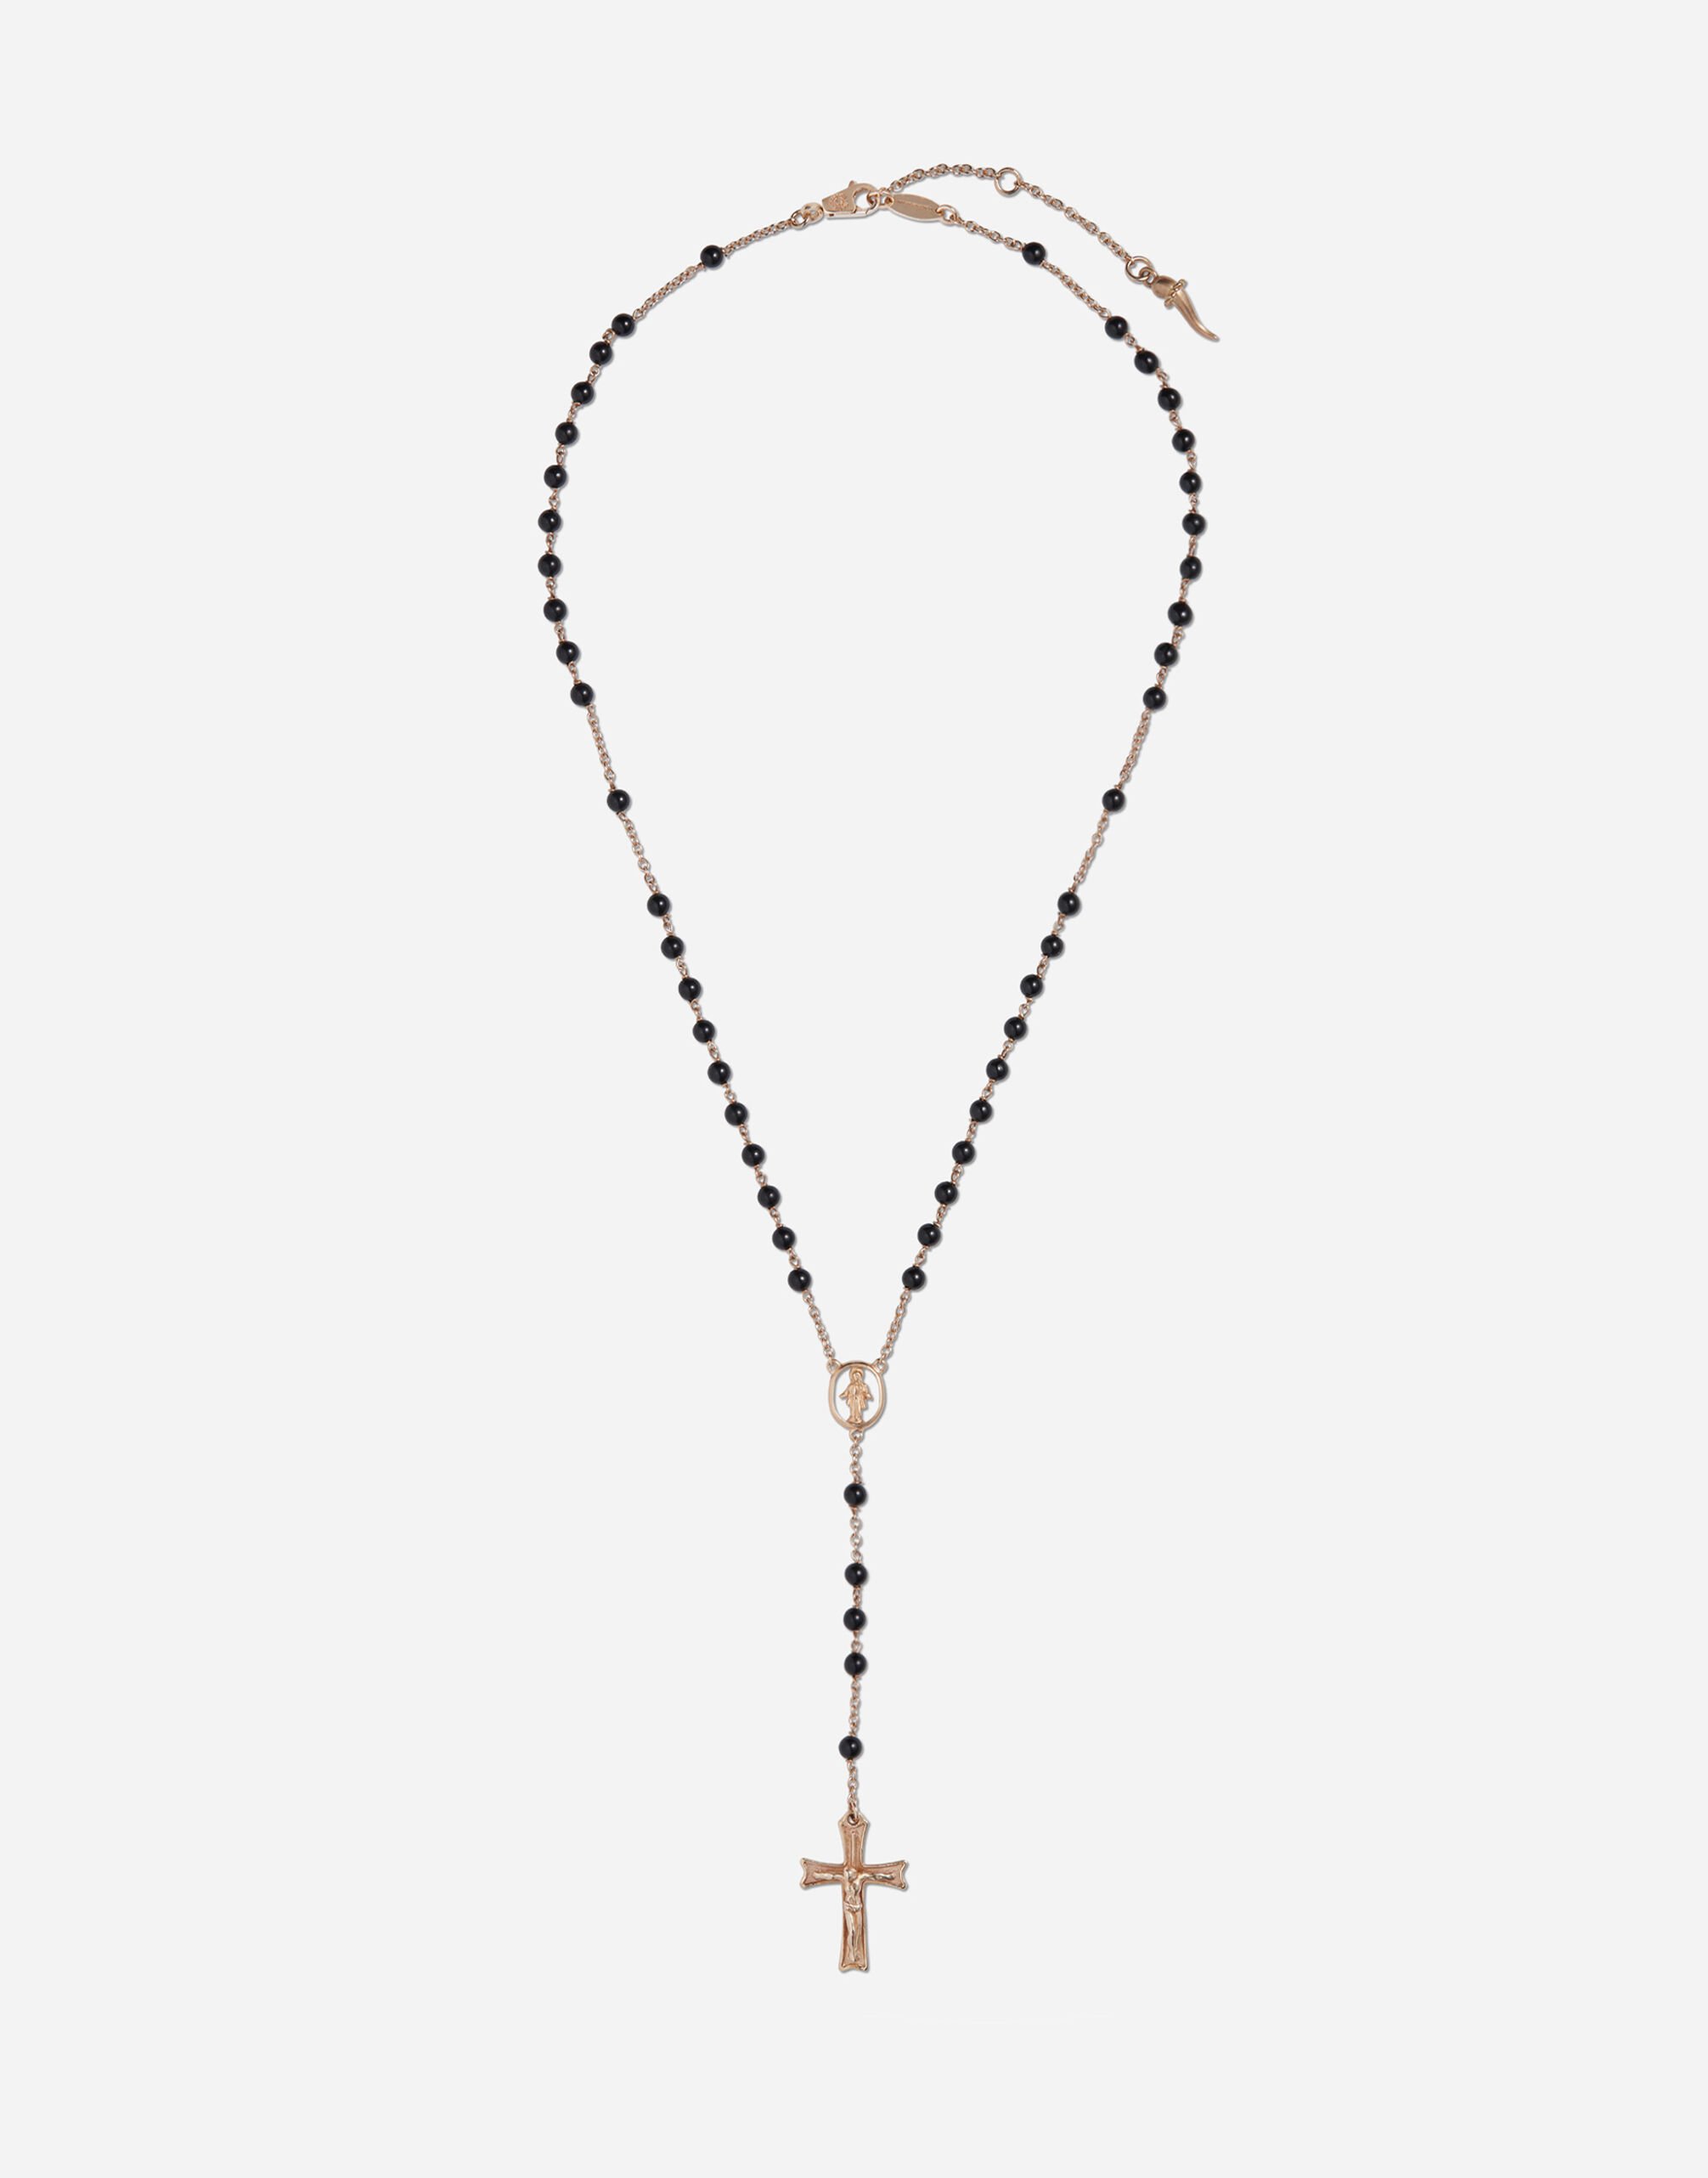 Dolce&Gabbana Yellow gold Devotion rosary necklace with black jade spheres Gold WNP6C1W1111